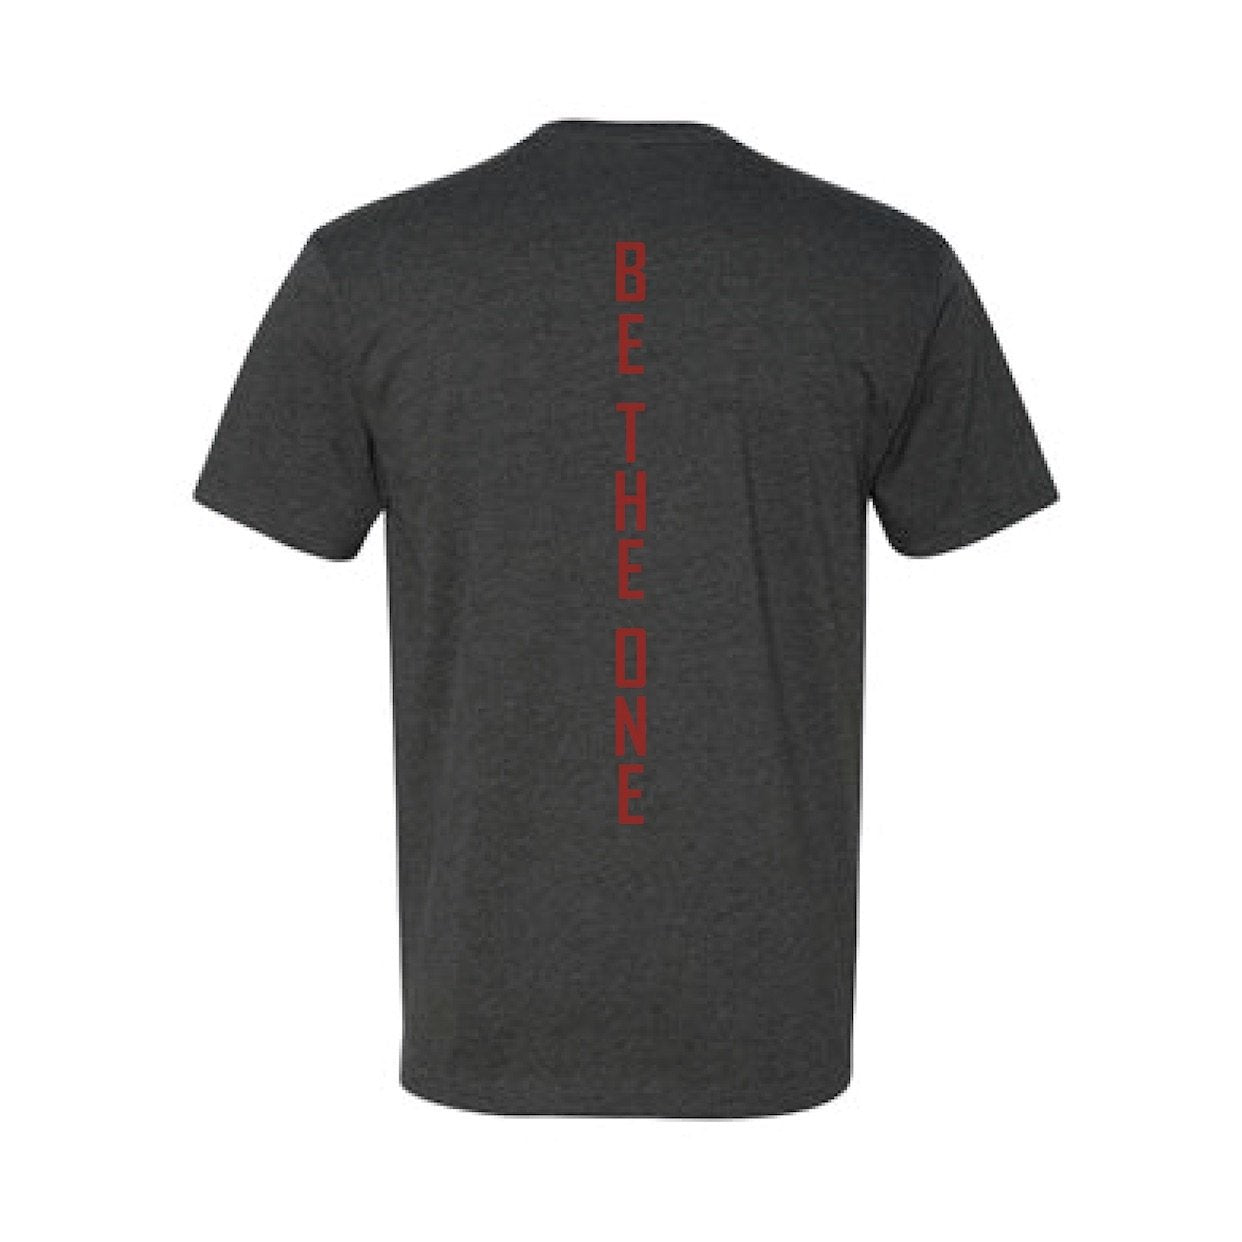 Be The One (on spine w/arrows) - Charcoal gray w/ red (unisex sizing)